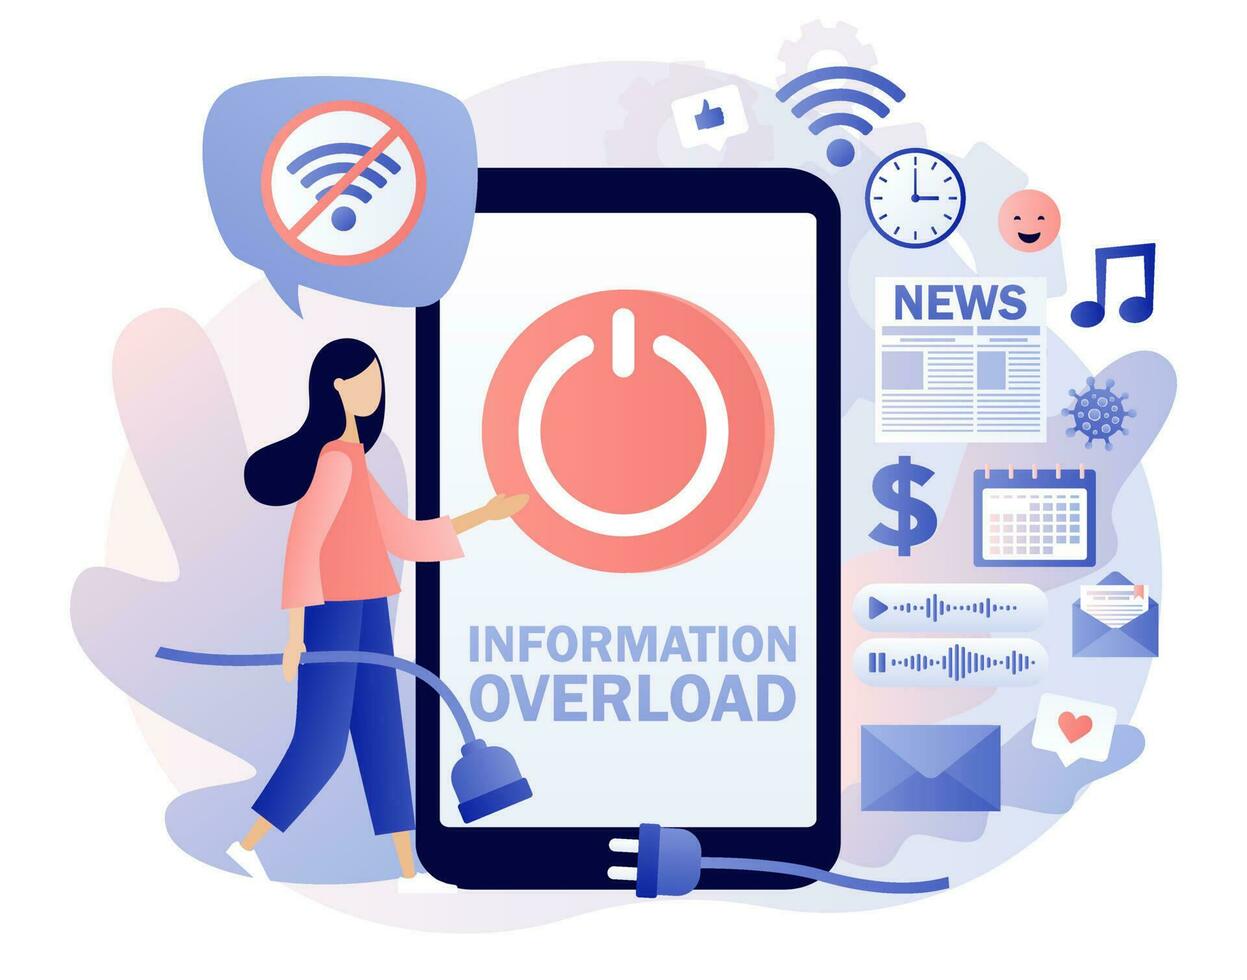 Information detox. Information overload. Tiny girl protecting themselves from flow of information and news turning off smartphone. Digital detox. Modern flat cartoon style. Vector illustration